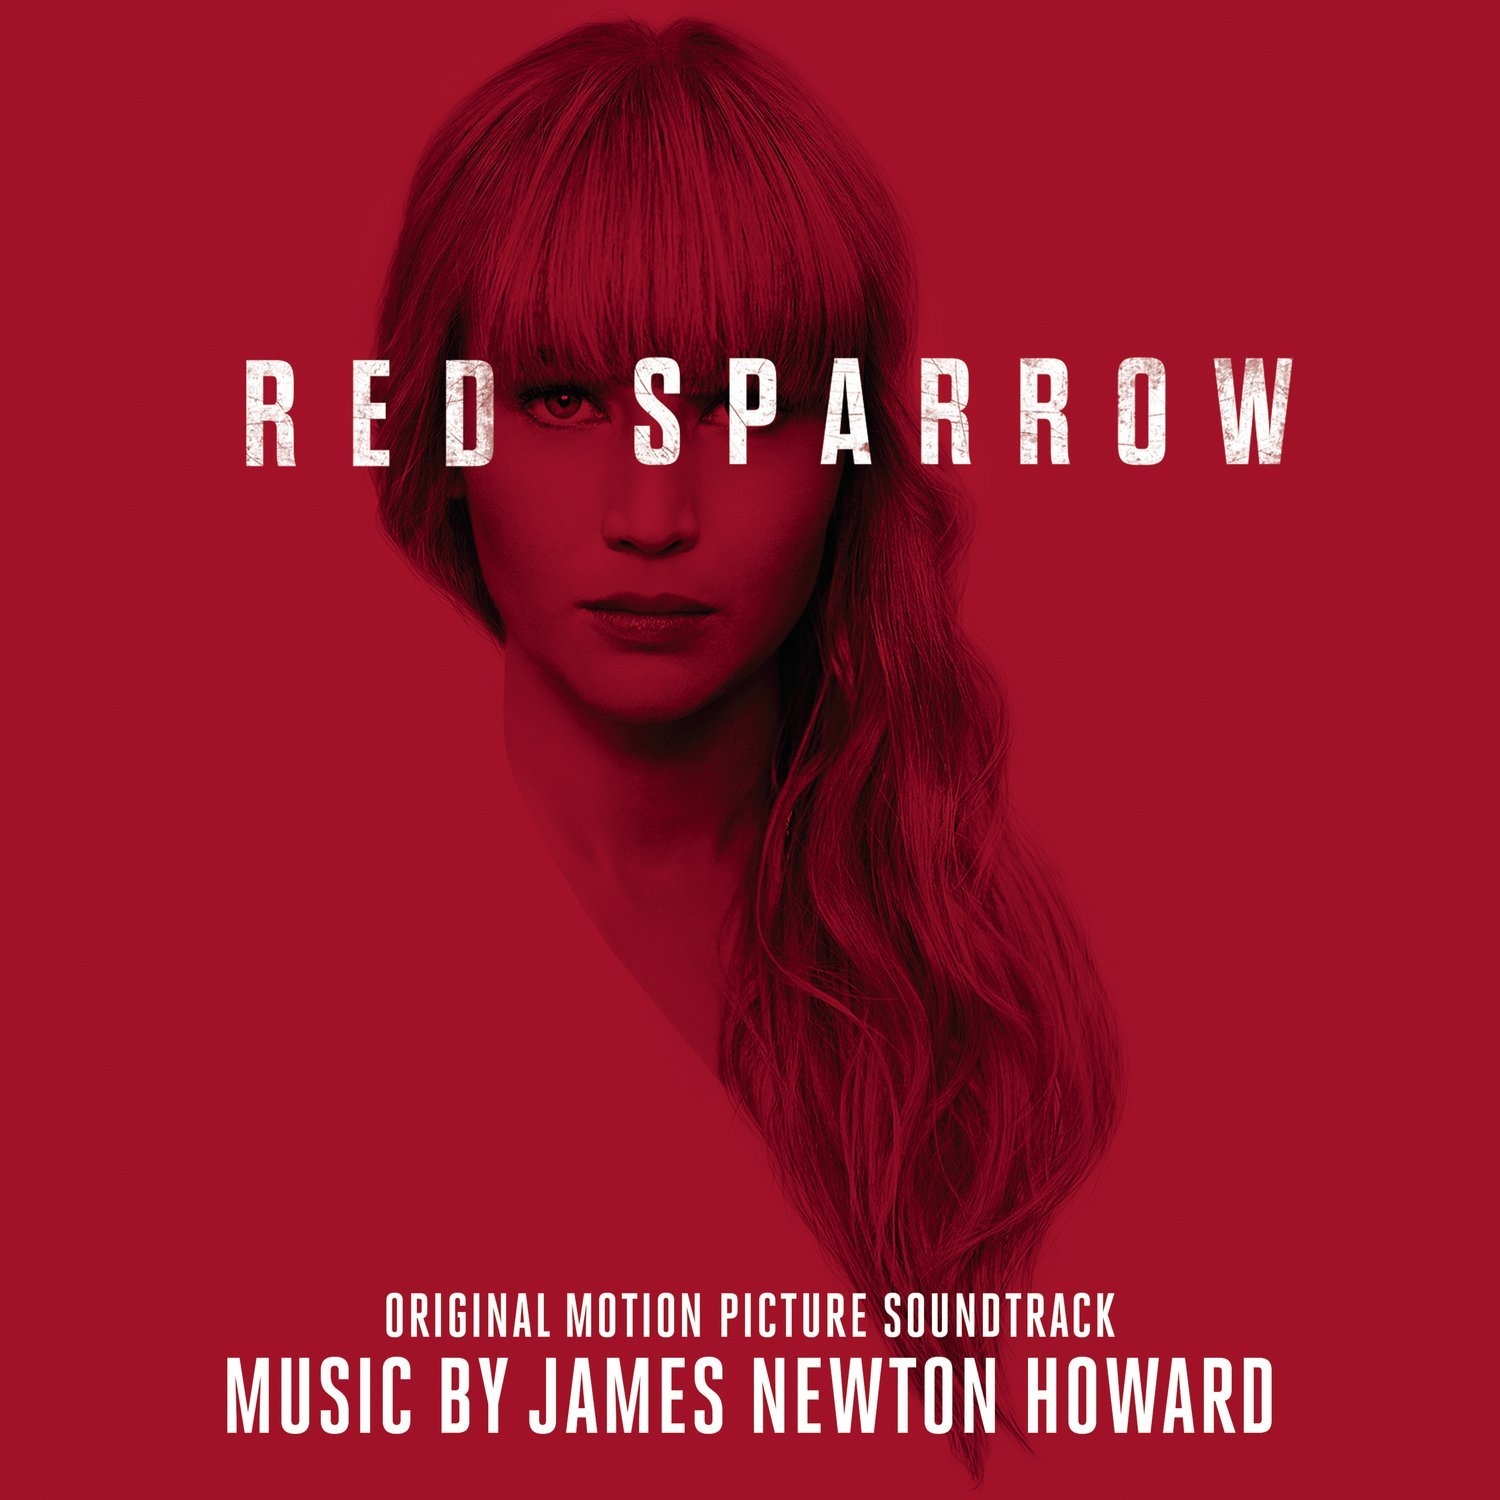 ost 04 18 red sparrow